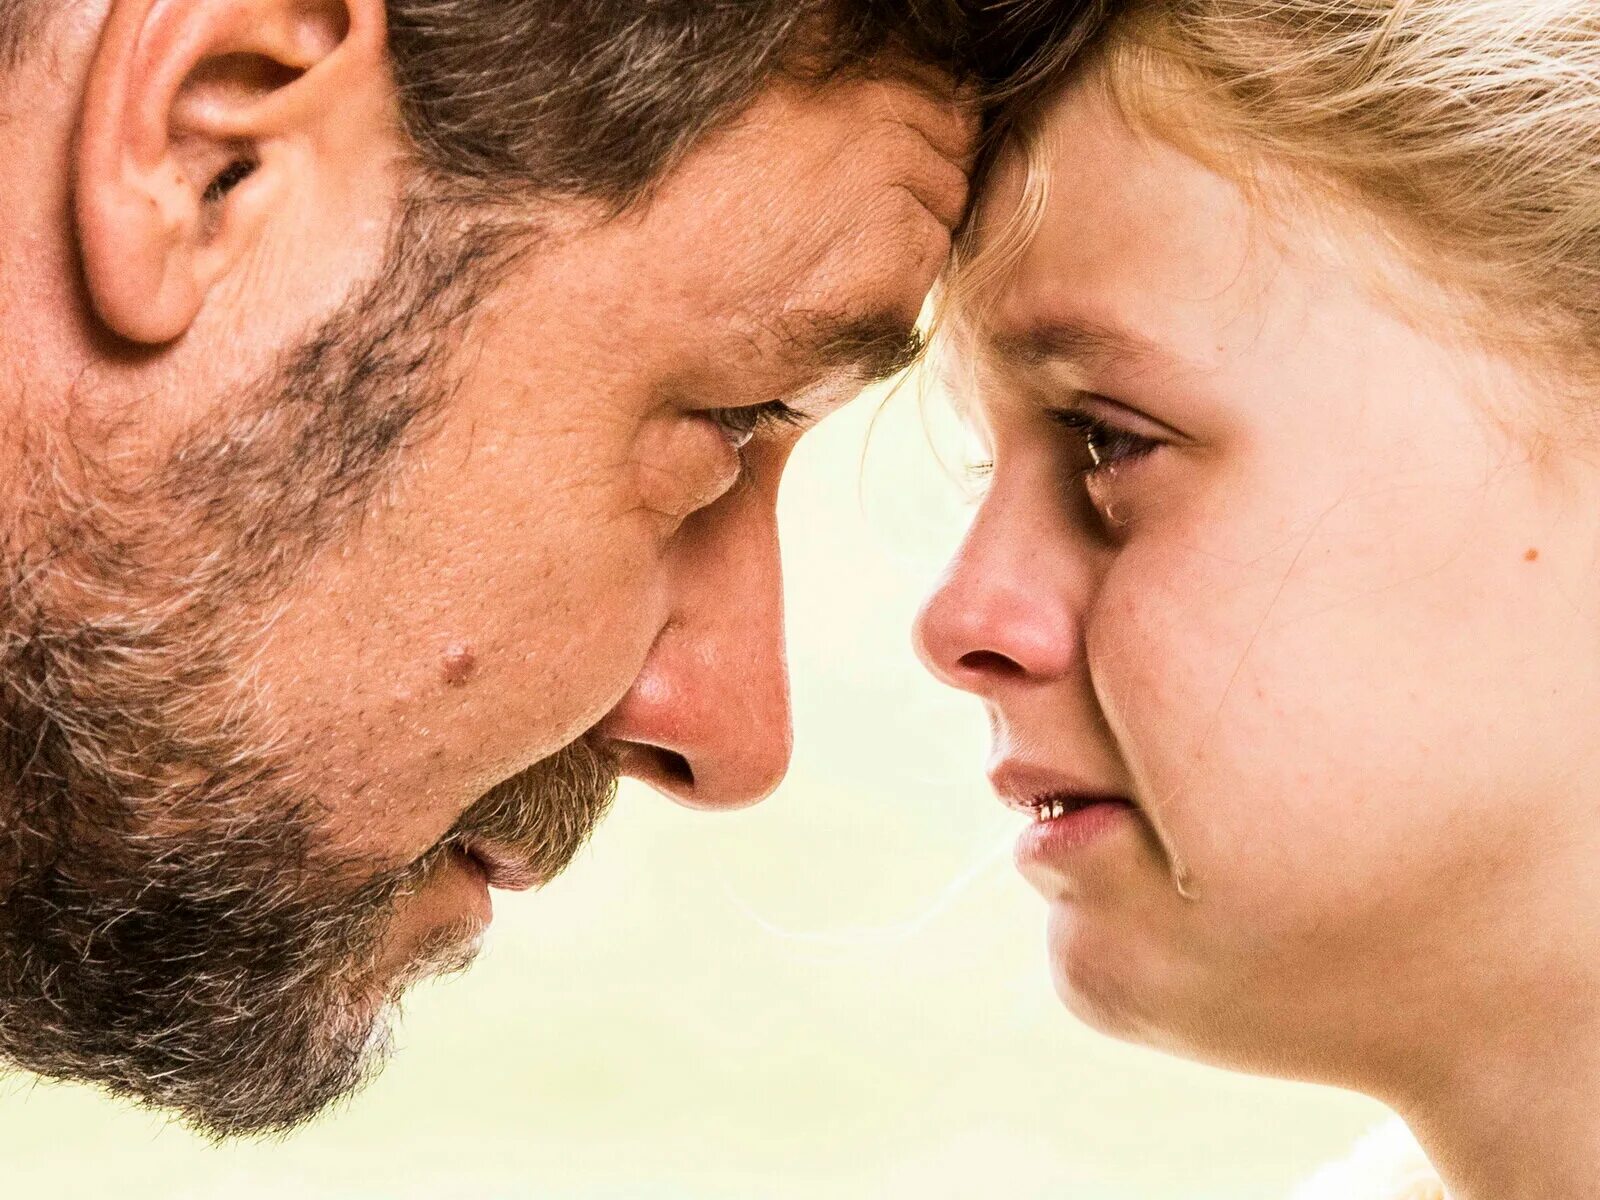 Fathers and daughters (2015) Russell Crowe. Отец и дочь. Французский поцелуй с папой. П отец дочь отец дочери